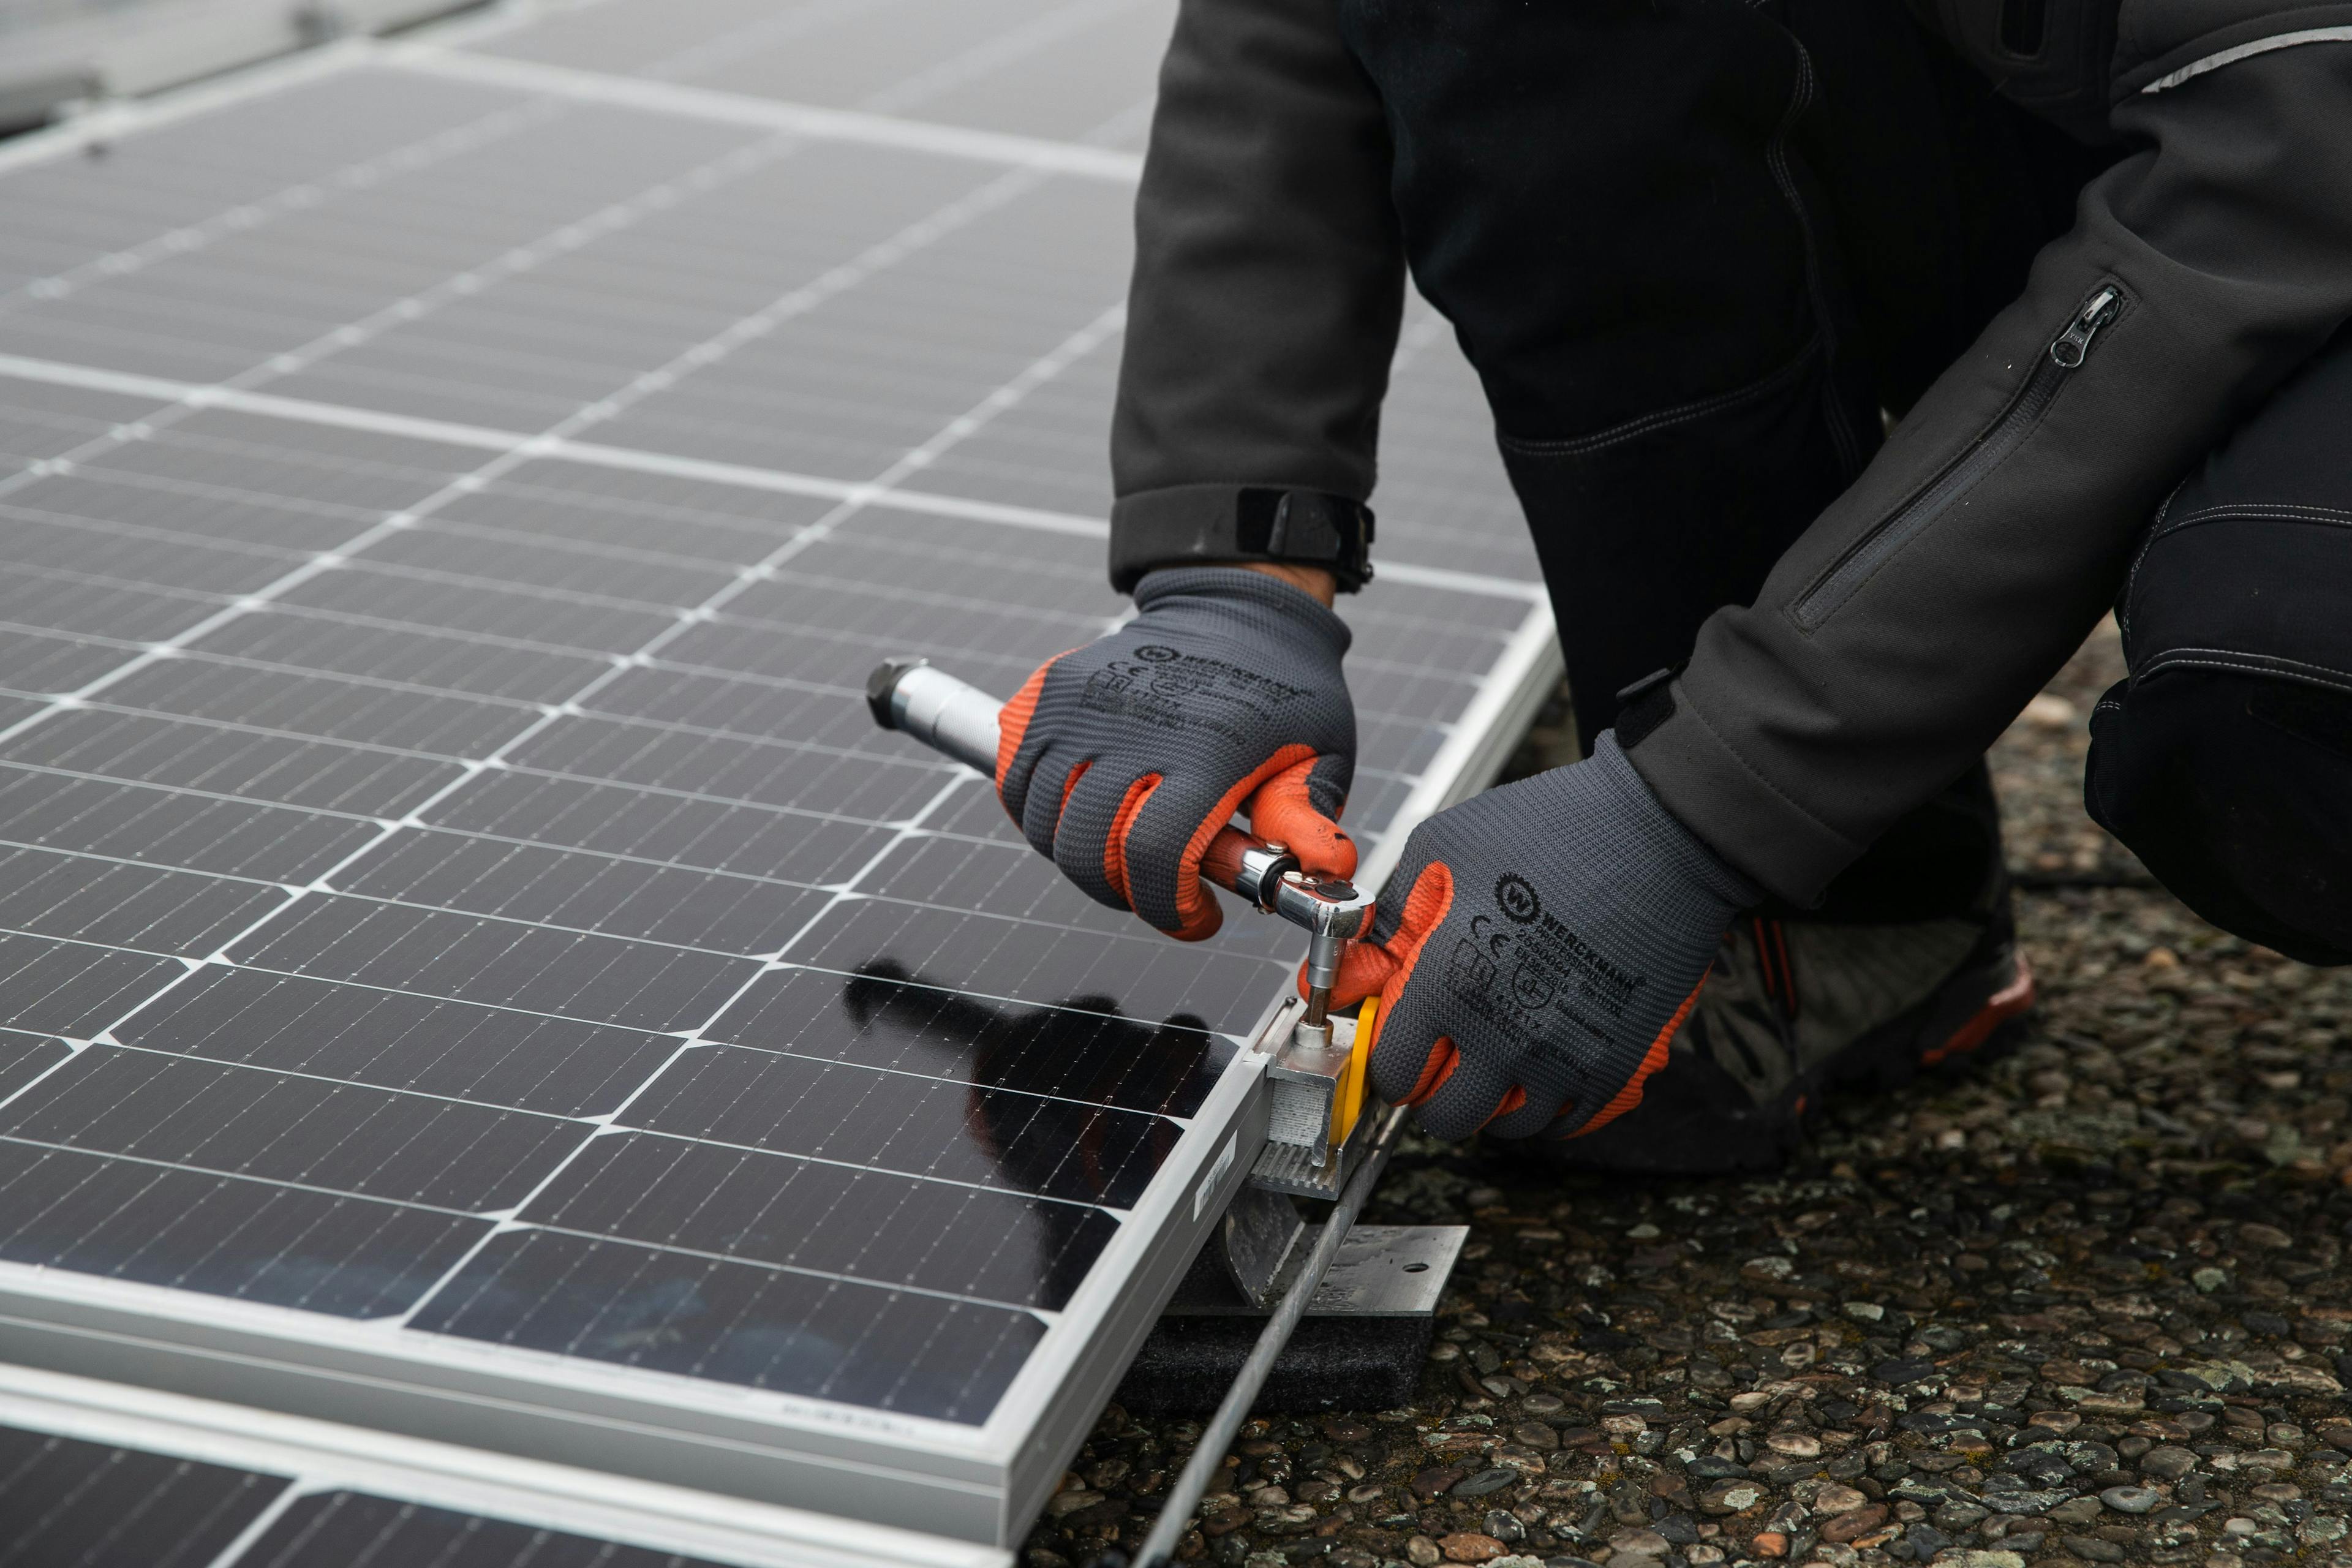 Maintenance of PV plants: The key to long-term efficiency and performance